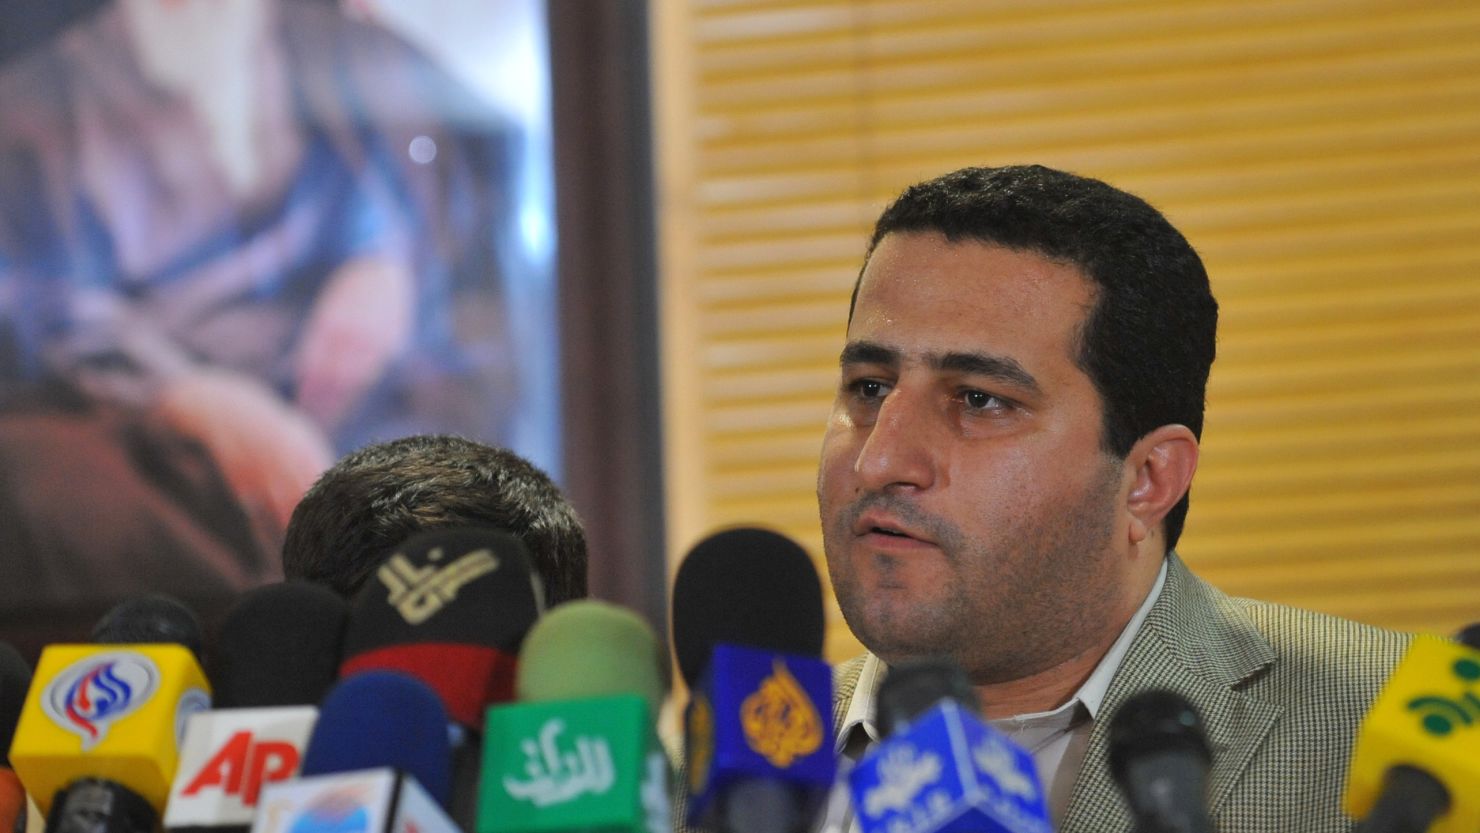 Shahram Amiri speaks to journalists during a press conference after arriving at Imam Khomini Airport July 15, 2010 in Tehran, Iran. 